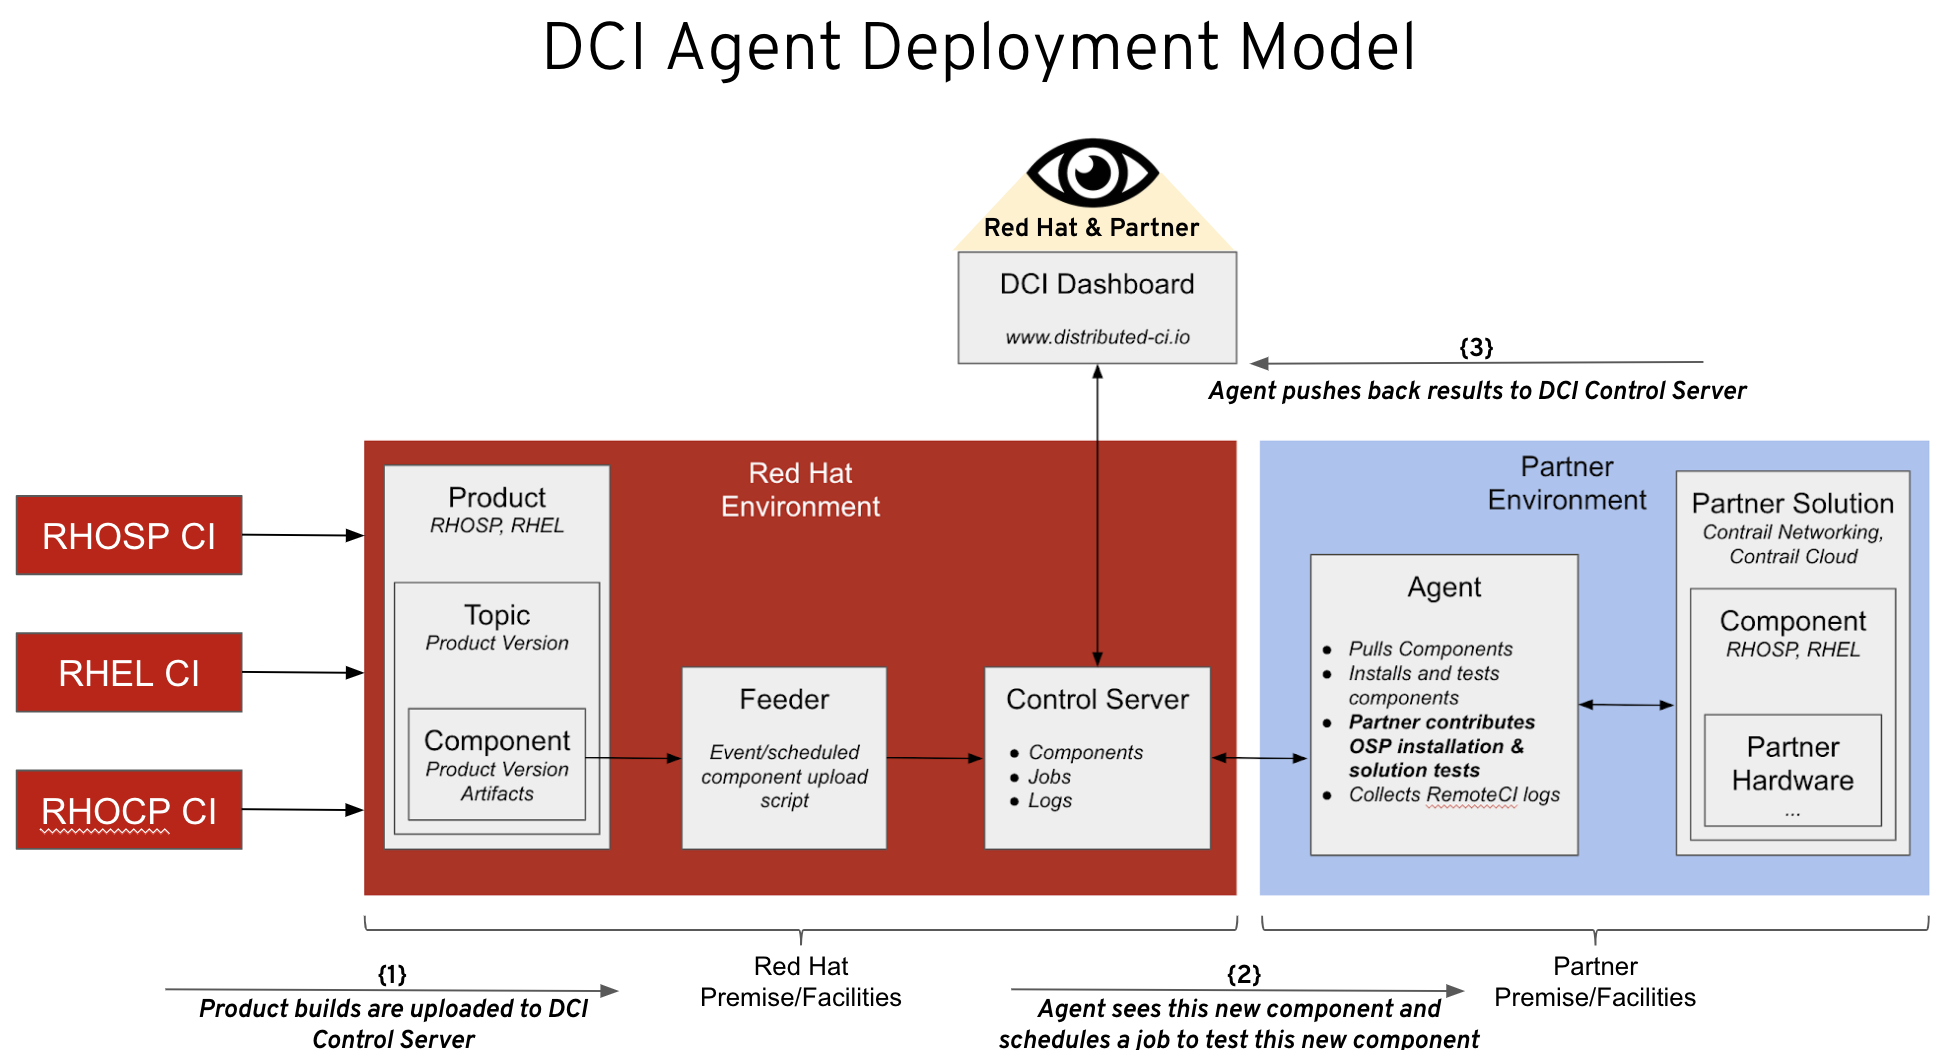 DCI Agent Deployment Model shows workflow and process of the agent